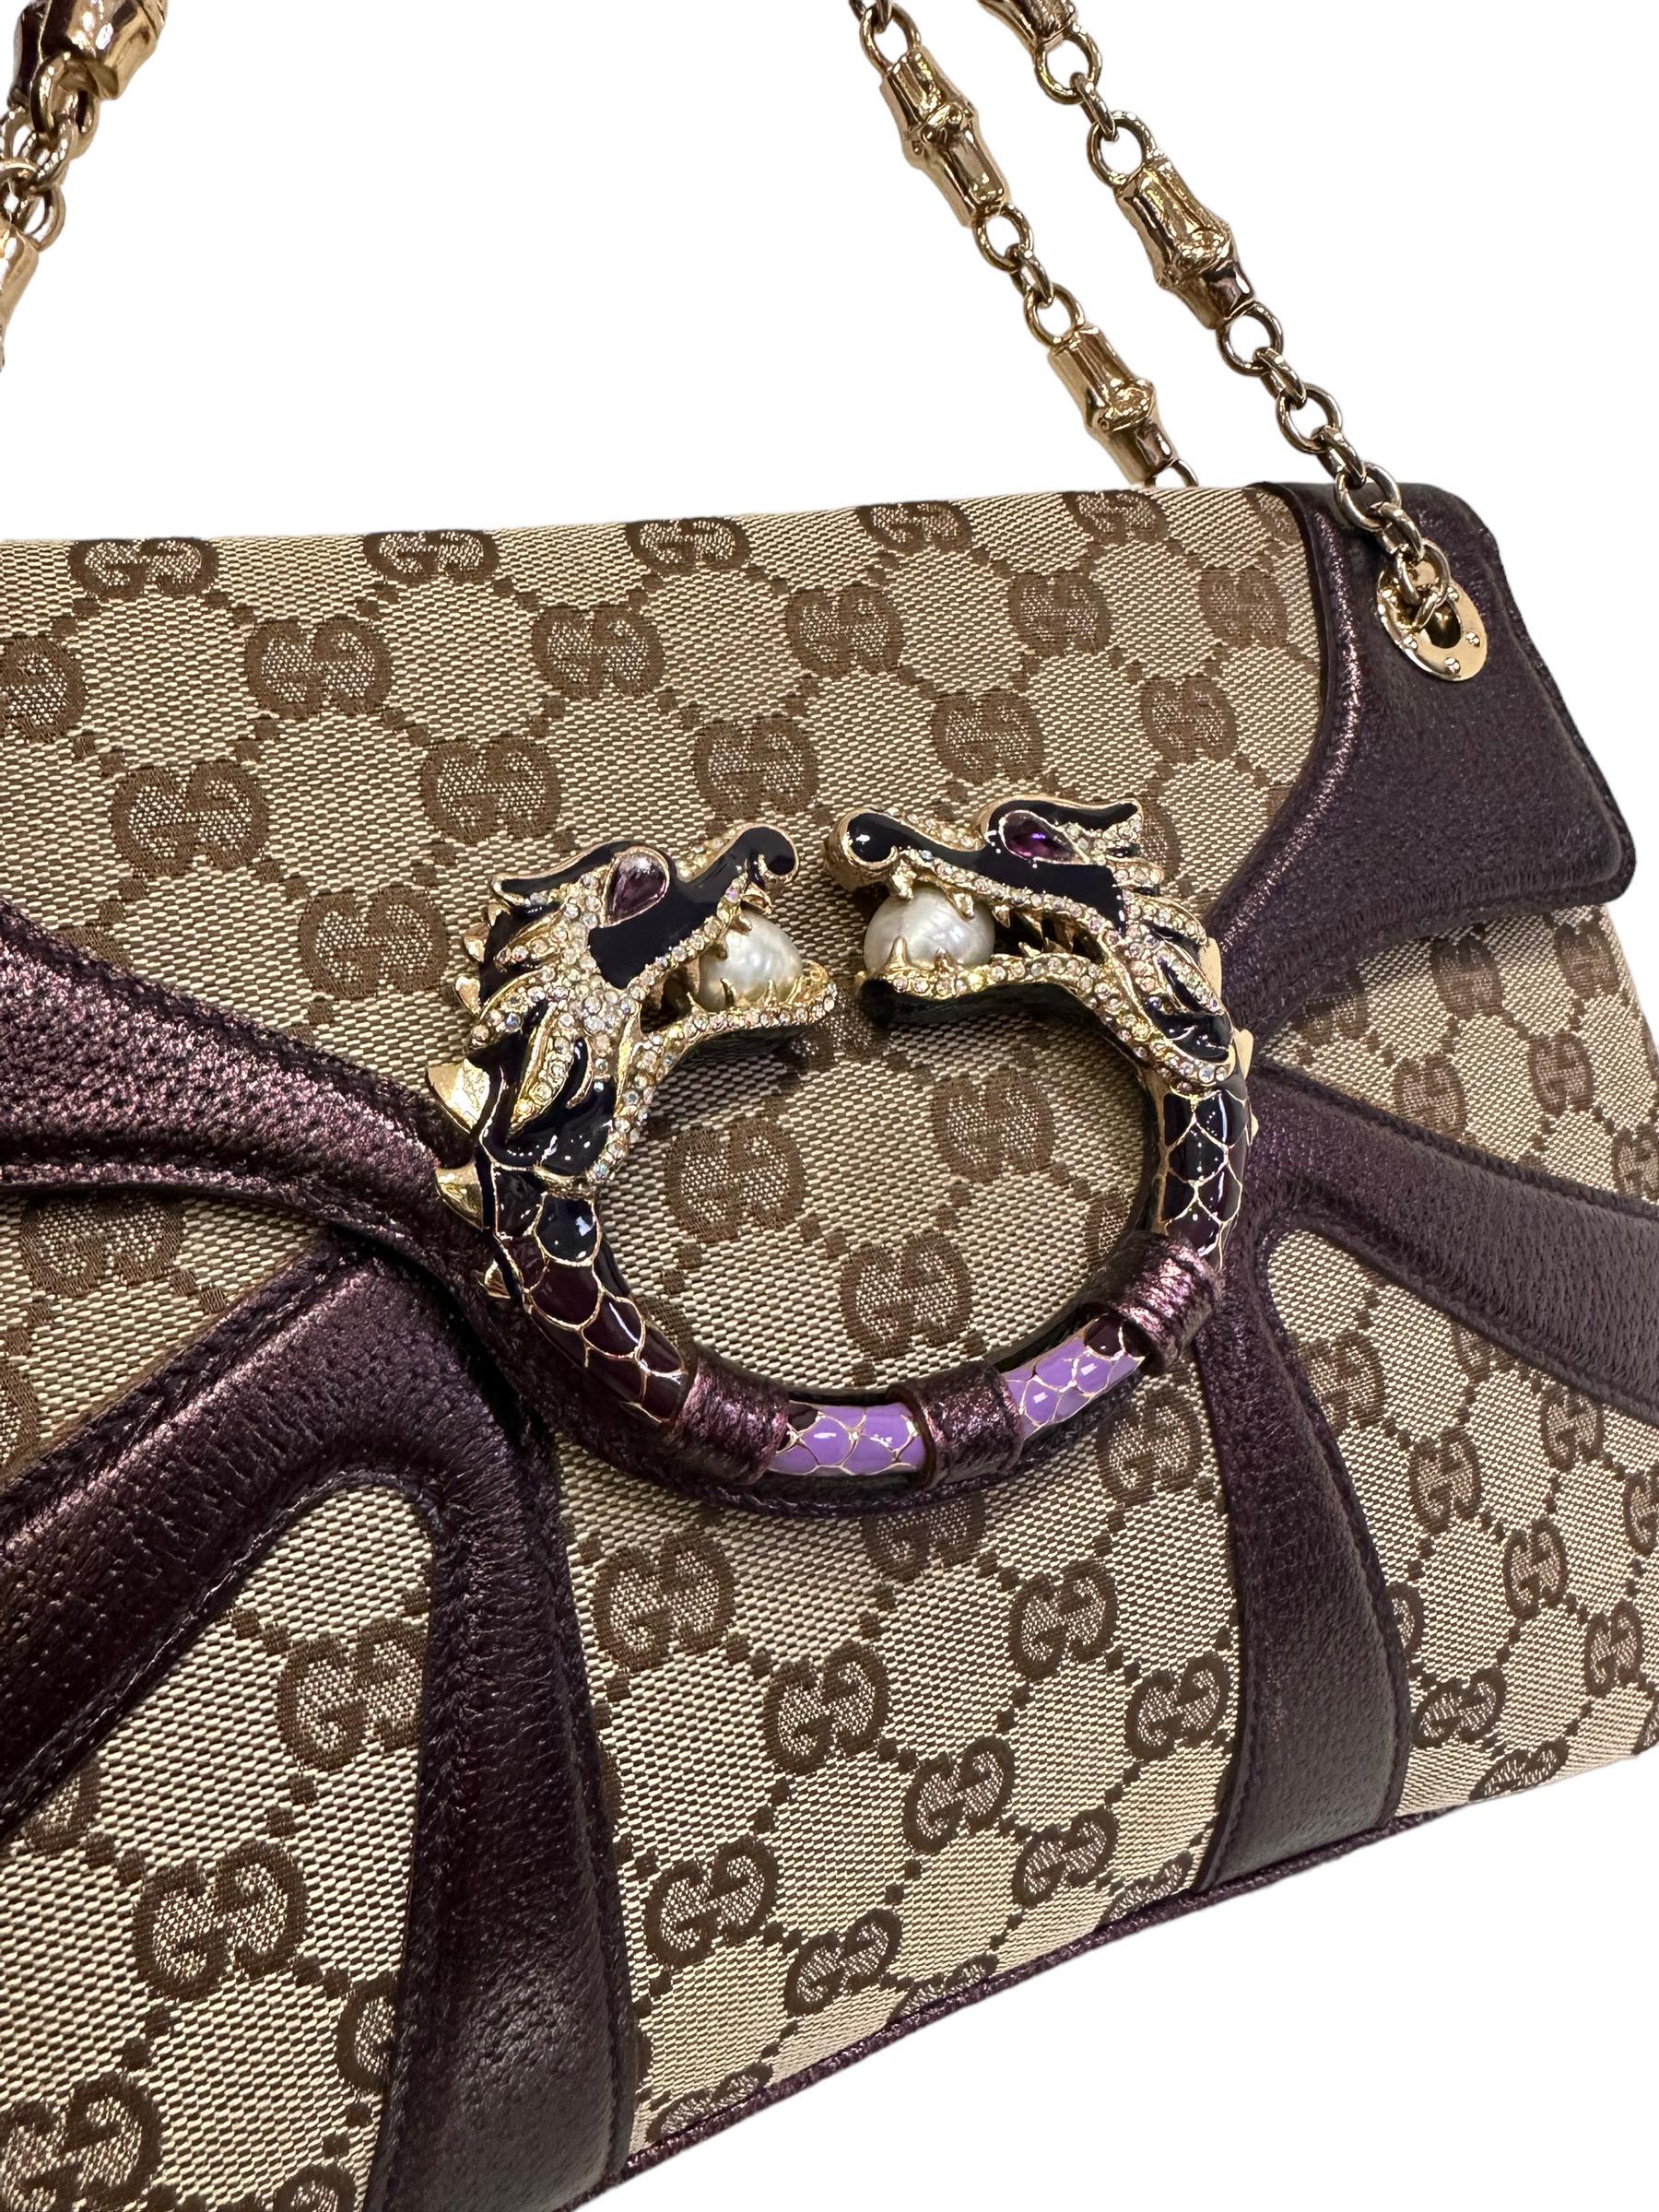 Gucci bag, Dragon model, limited edition Tom Ford line, 2004 collection, made in GG Supreme canvas with purple leather inserts and golden hardware. The bag has a front flap with button closure, internally lined in brown canvas, quite large. Equipped